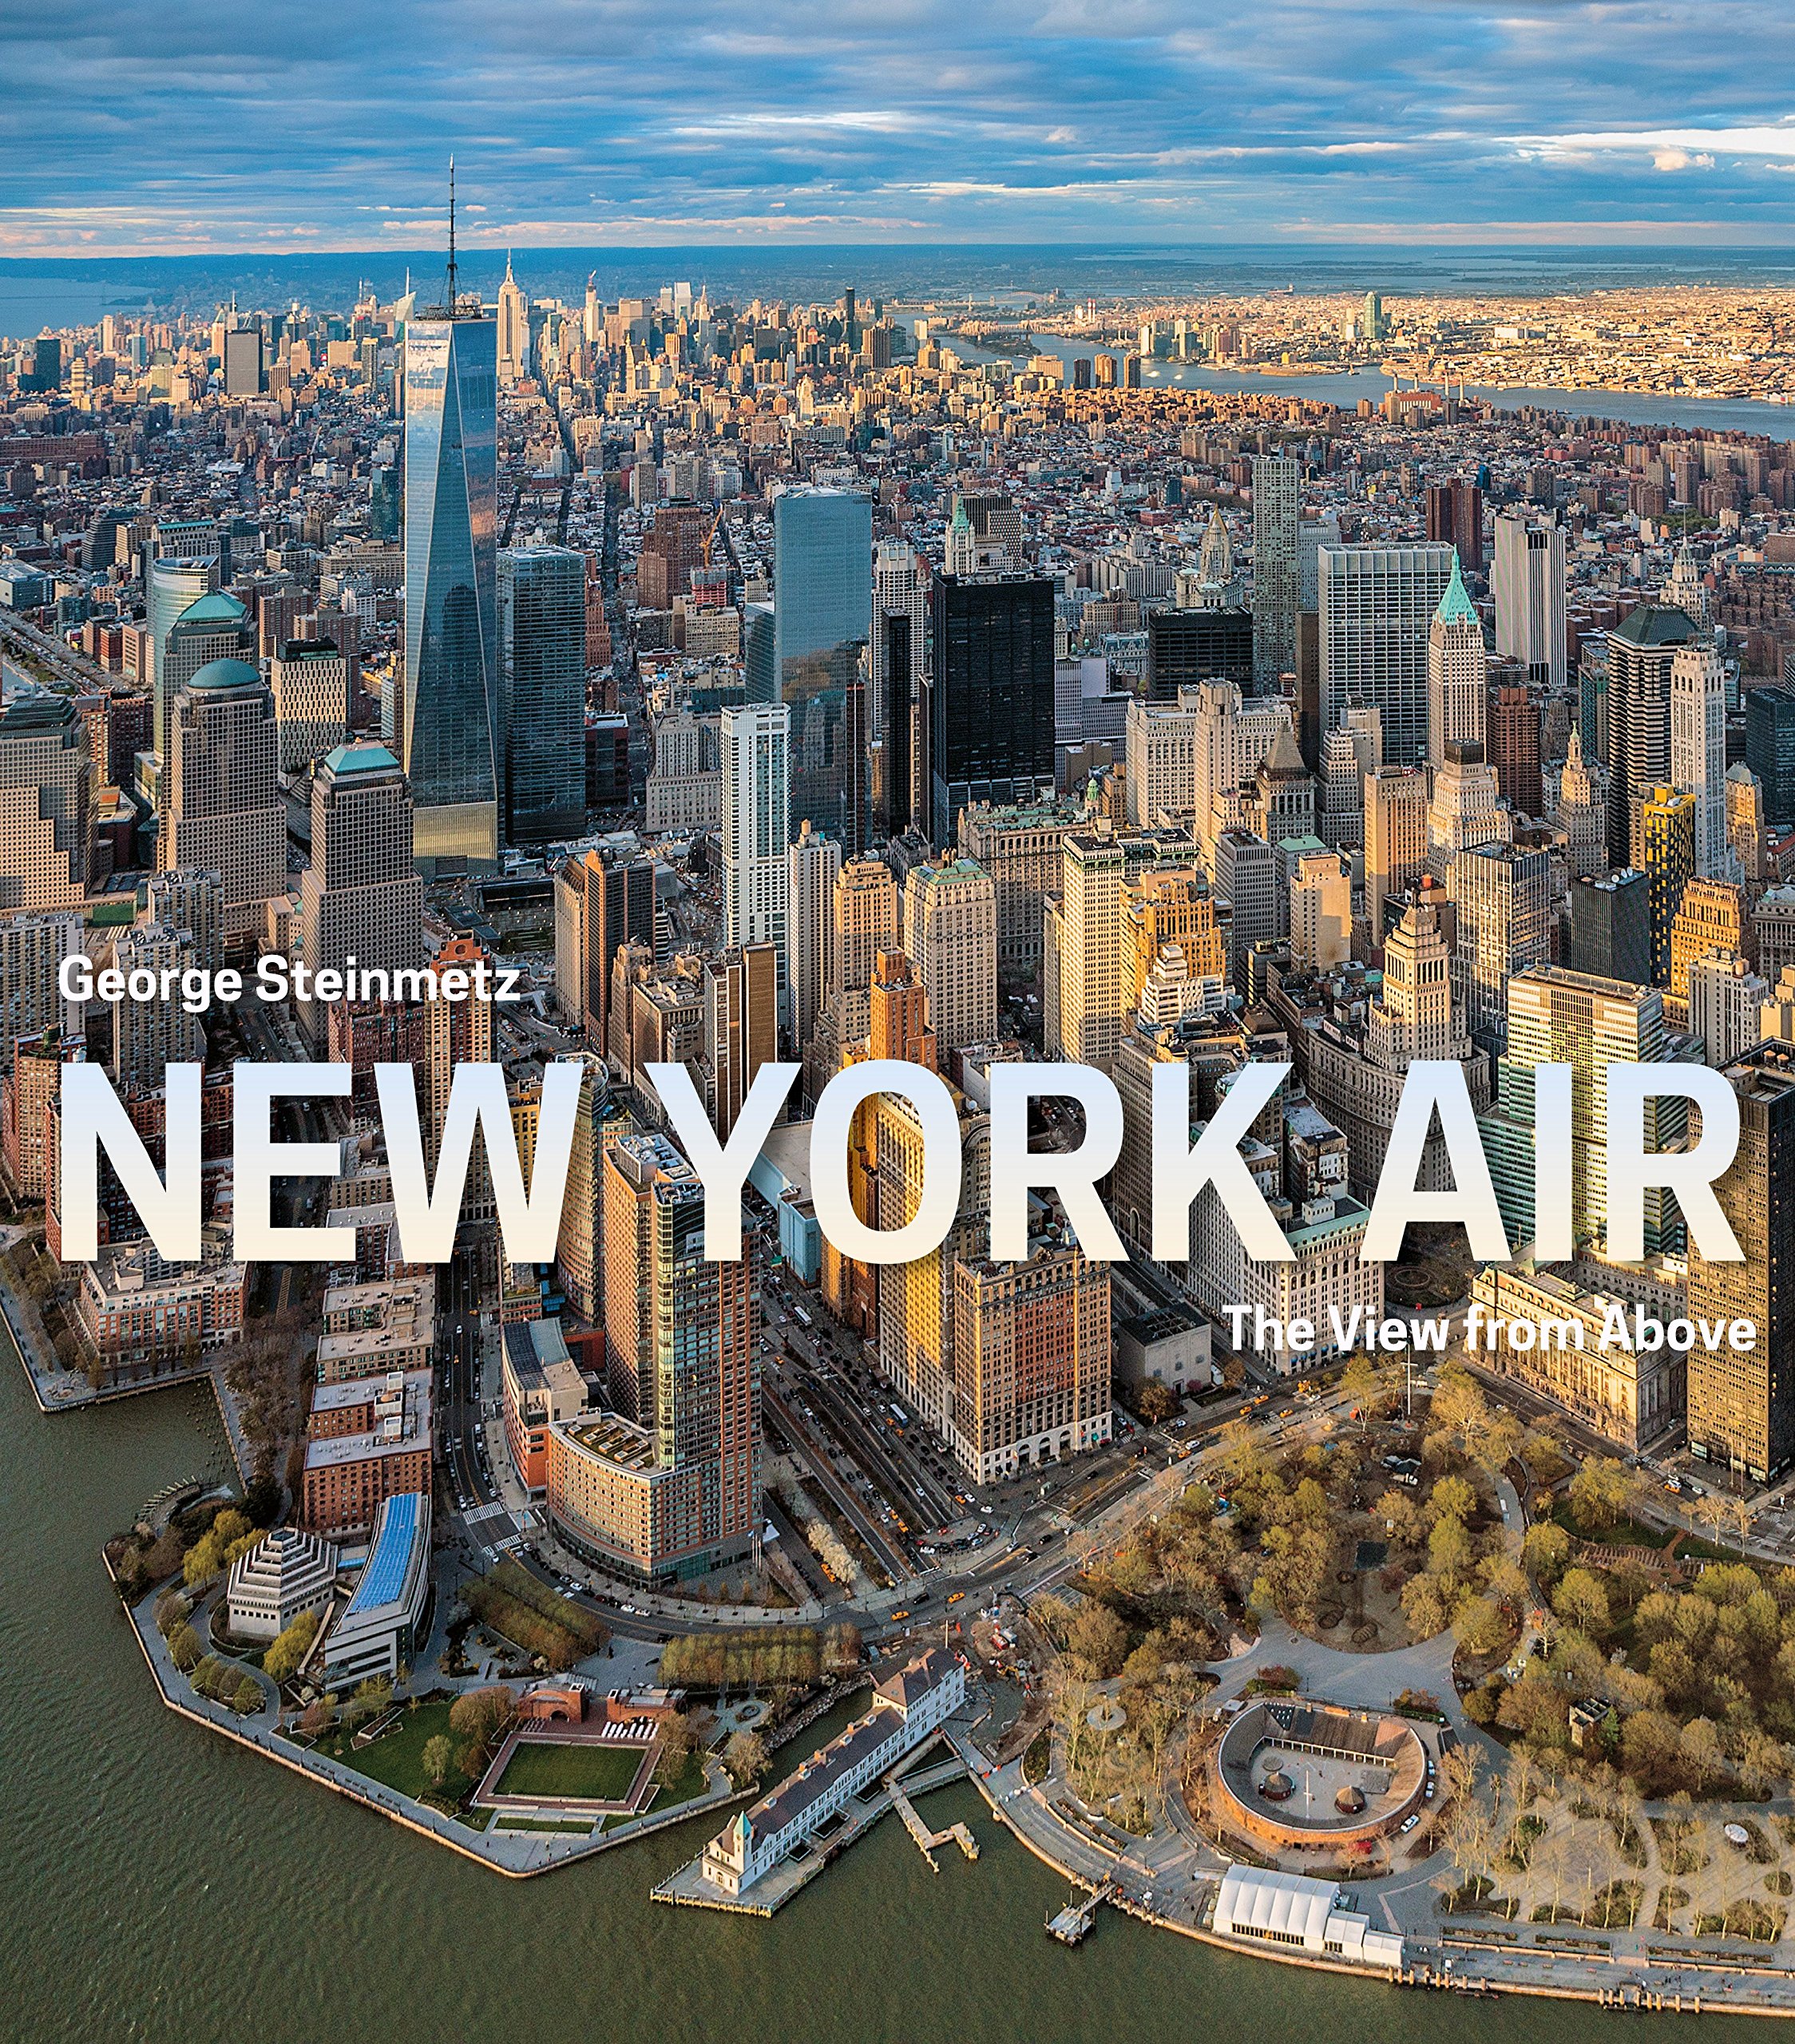 New York Air: The View from Above: George Steinmetz: 9781419717895 ...